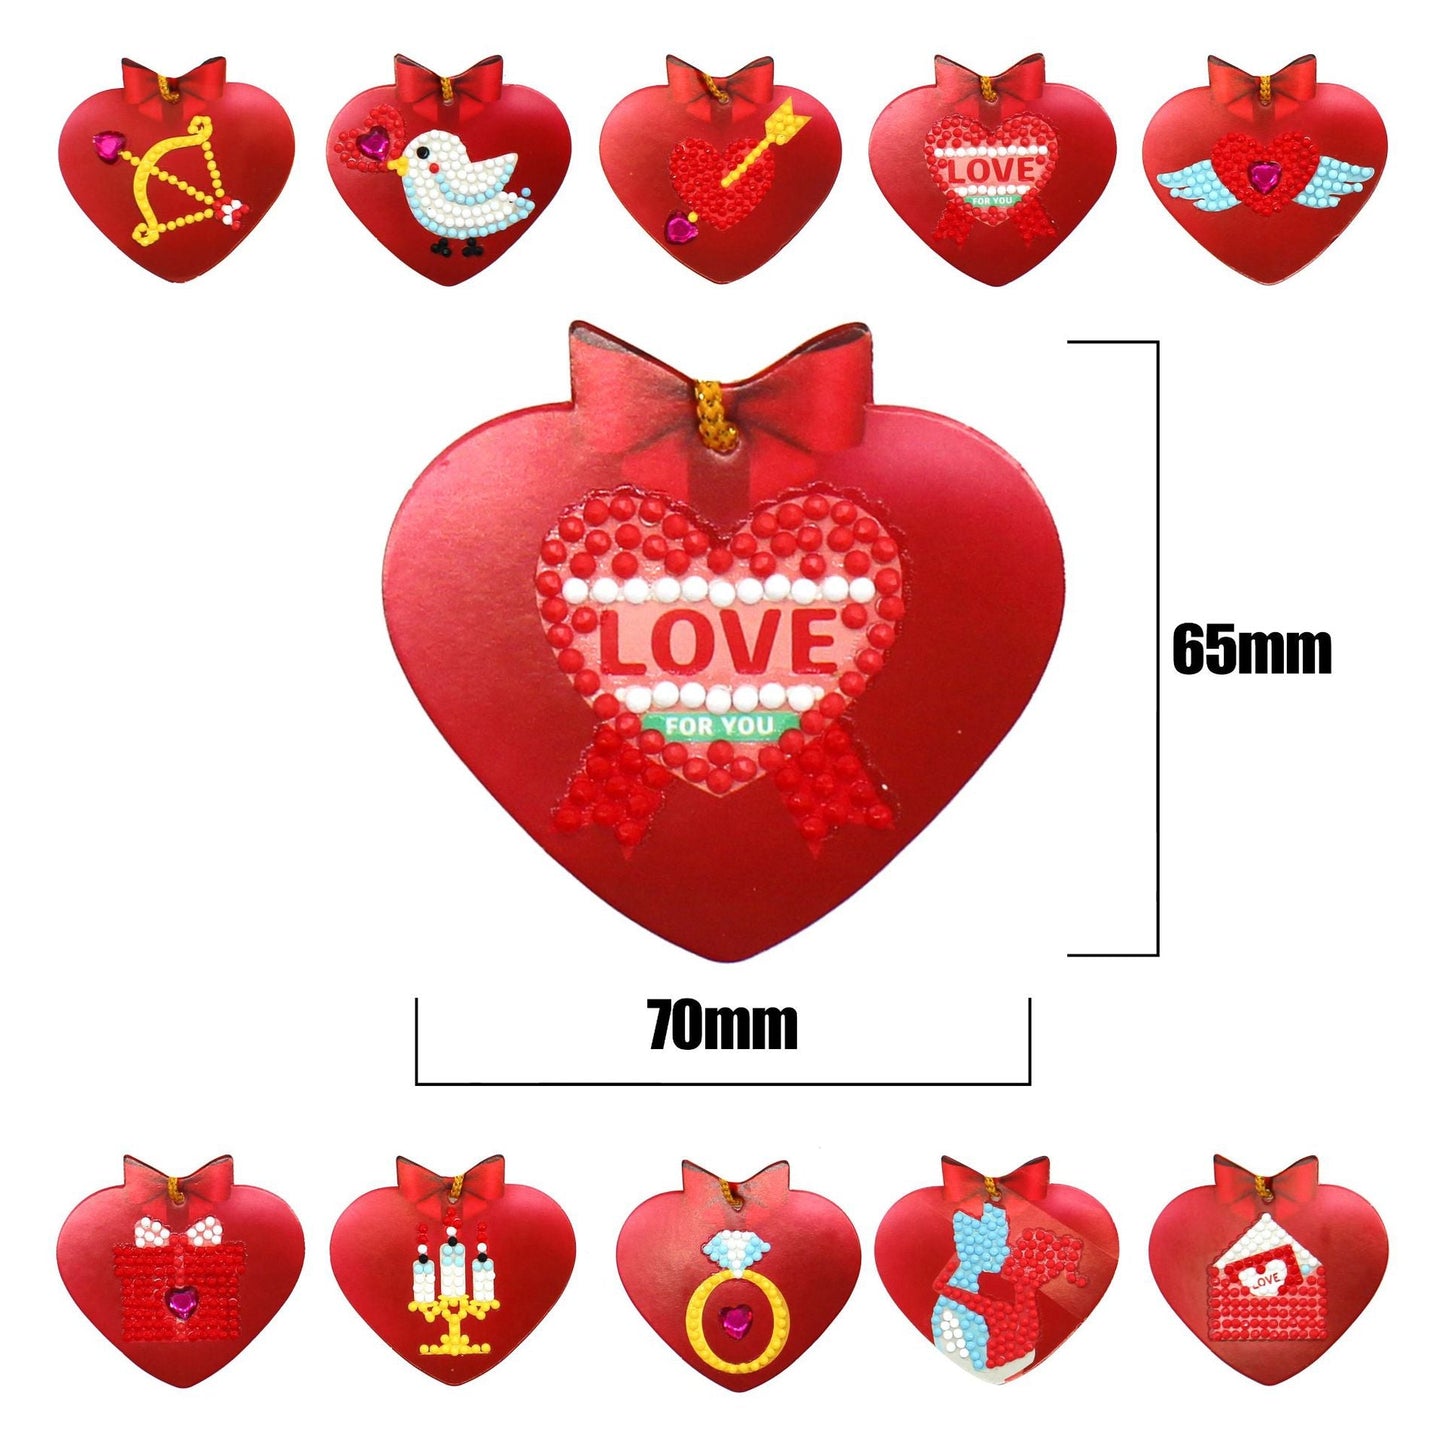 Heart Shaped Charms for Christmas Gifts